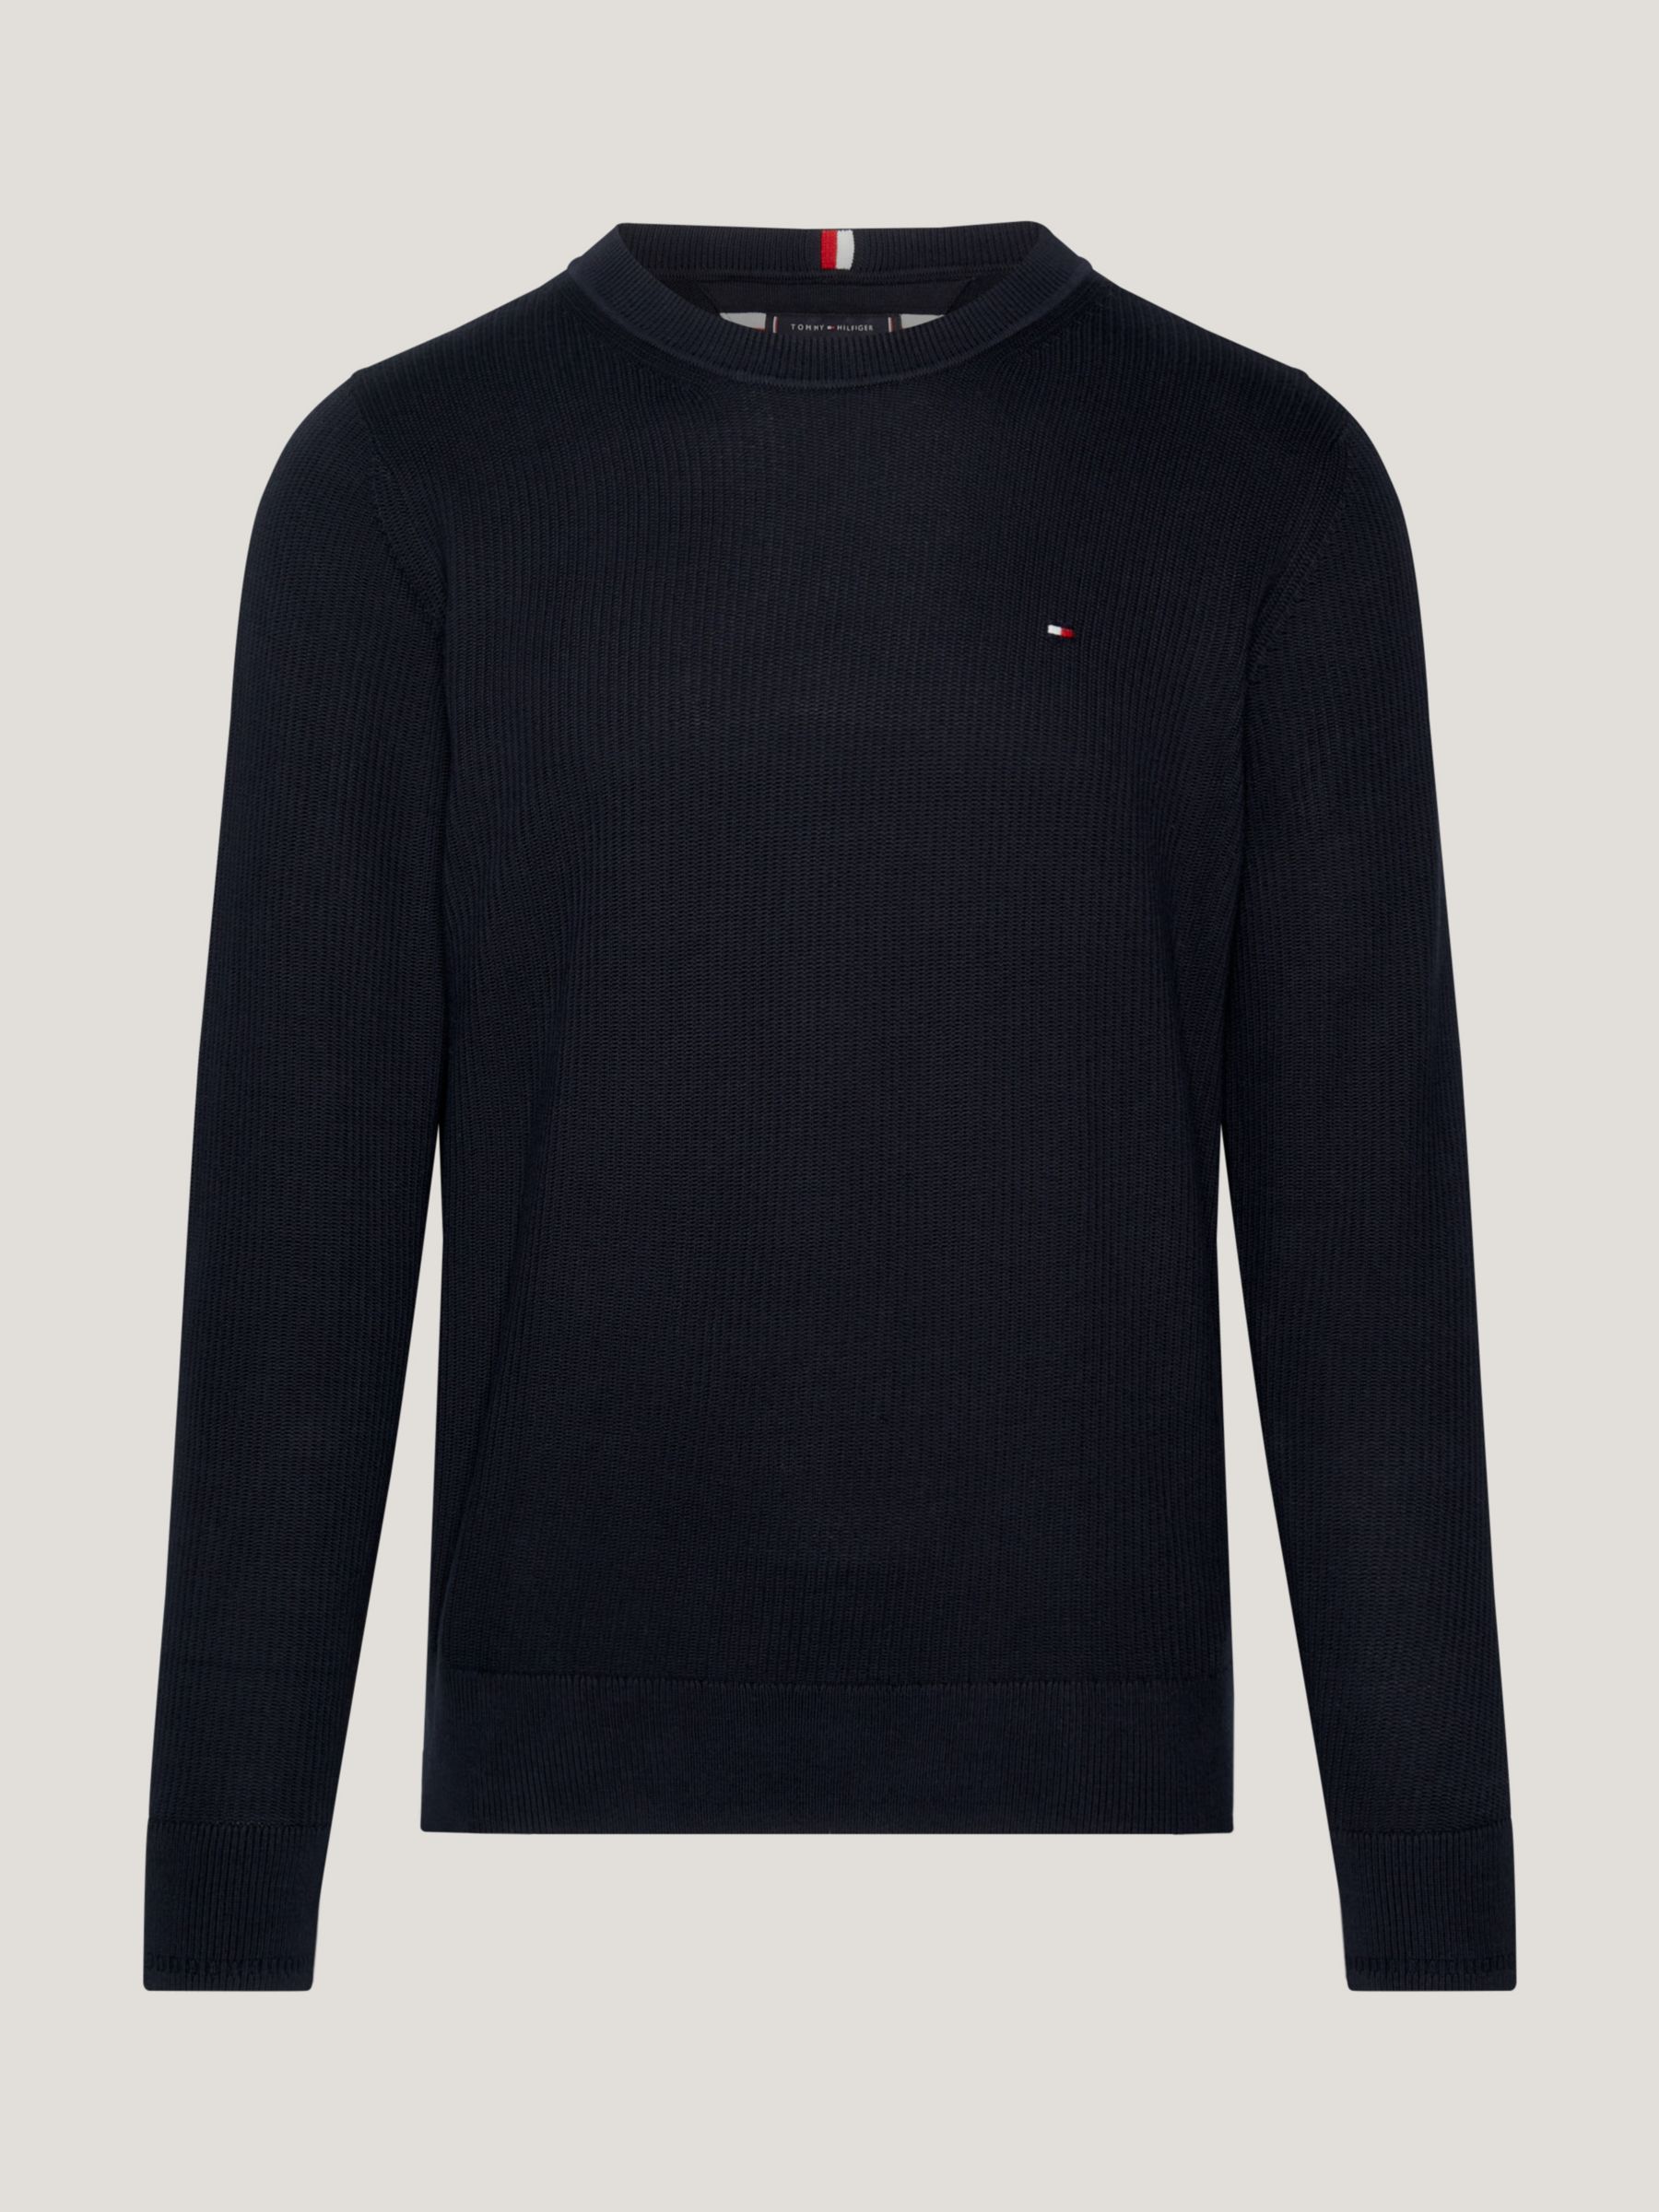 Tommy Hilfiger Chain Ridge Structure Jumper, Navy at John Lewis & Partners